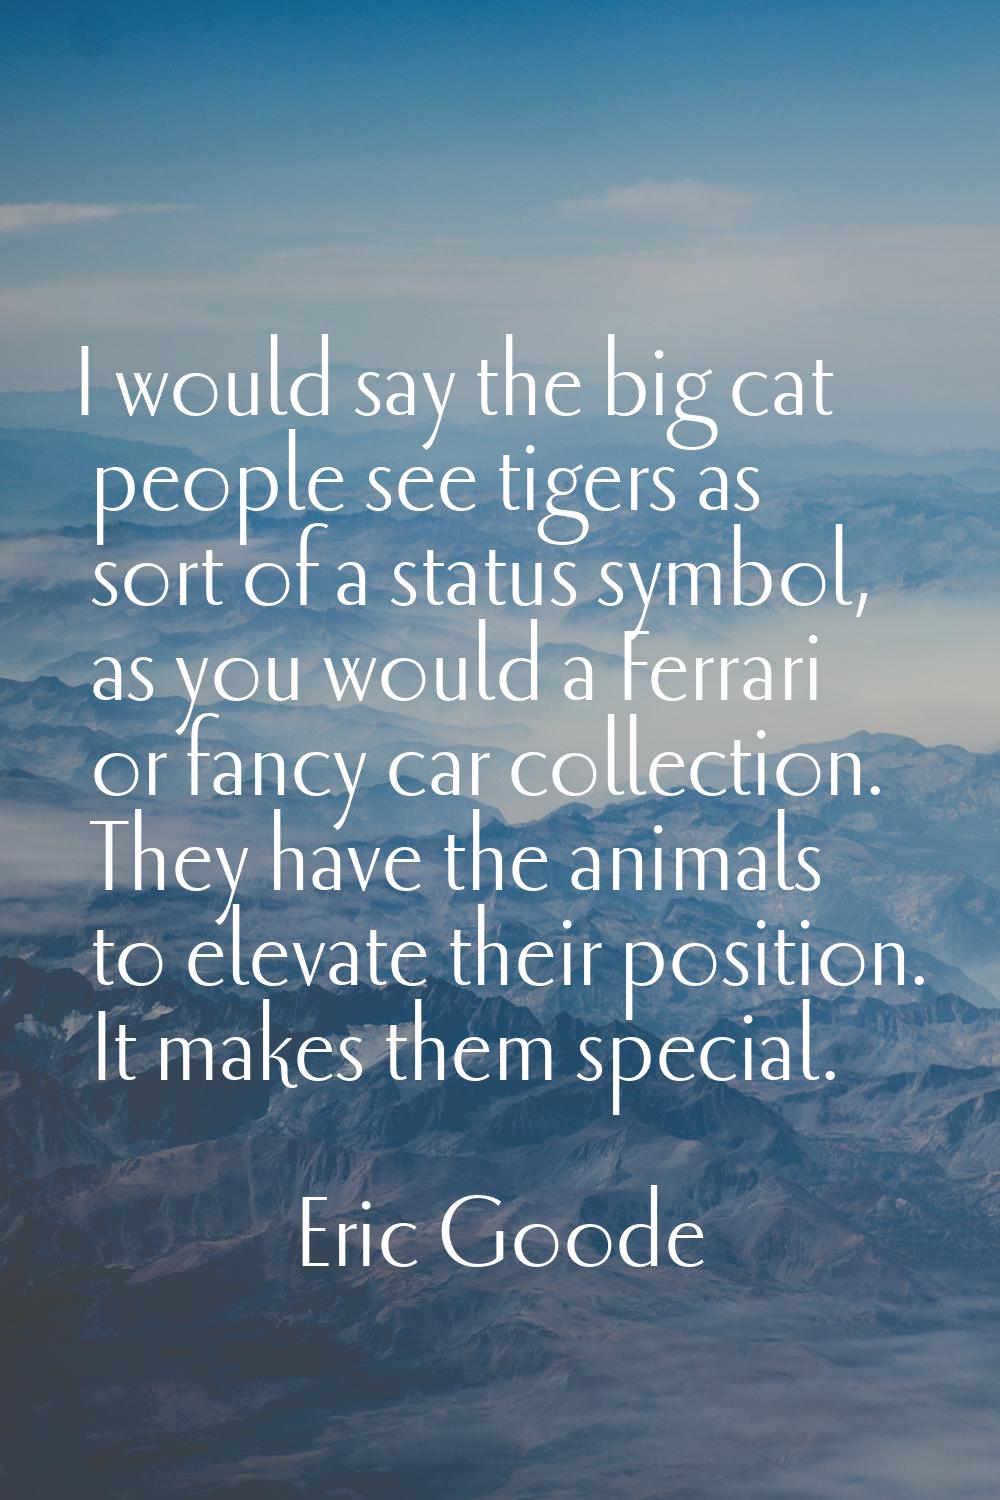 I would say the big cat people see tigers as sort of a status symbol, as you would a Ferrari or fan